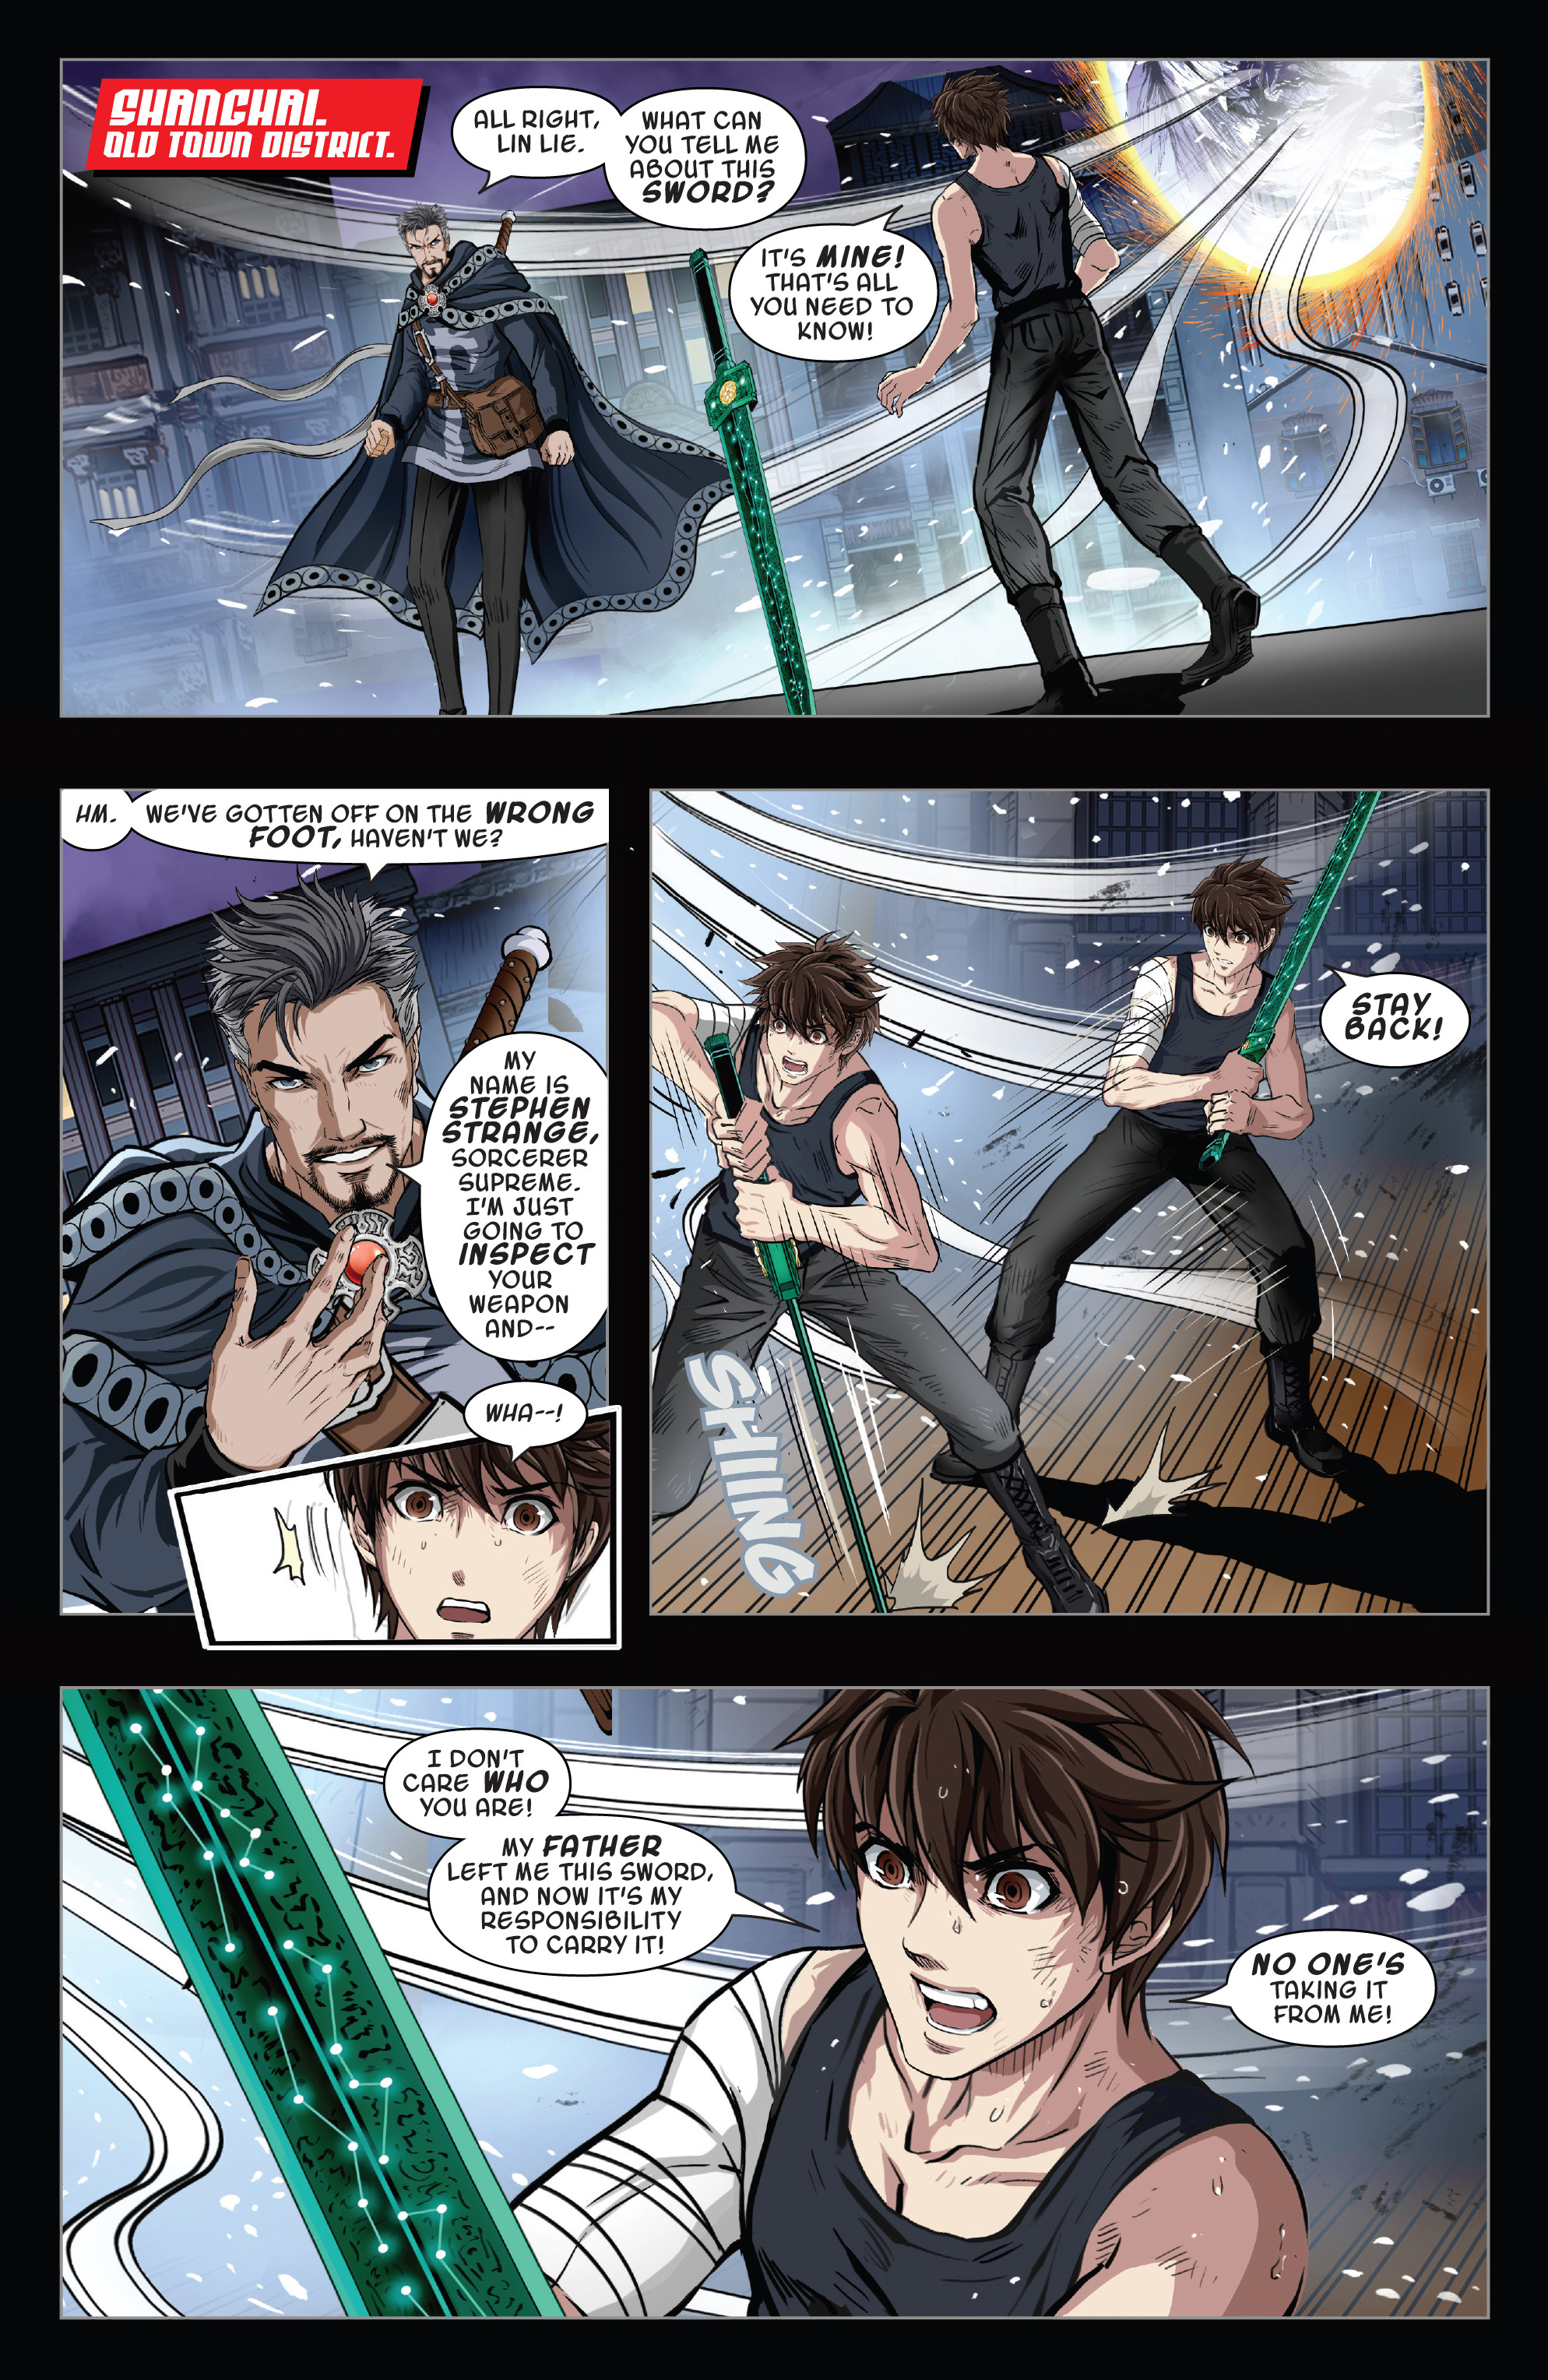 Sword Master (2019-): Chapter 6 - Page 3